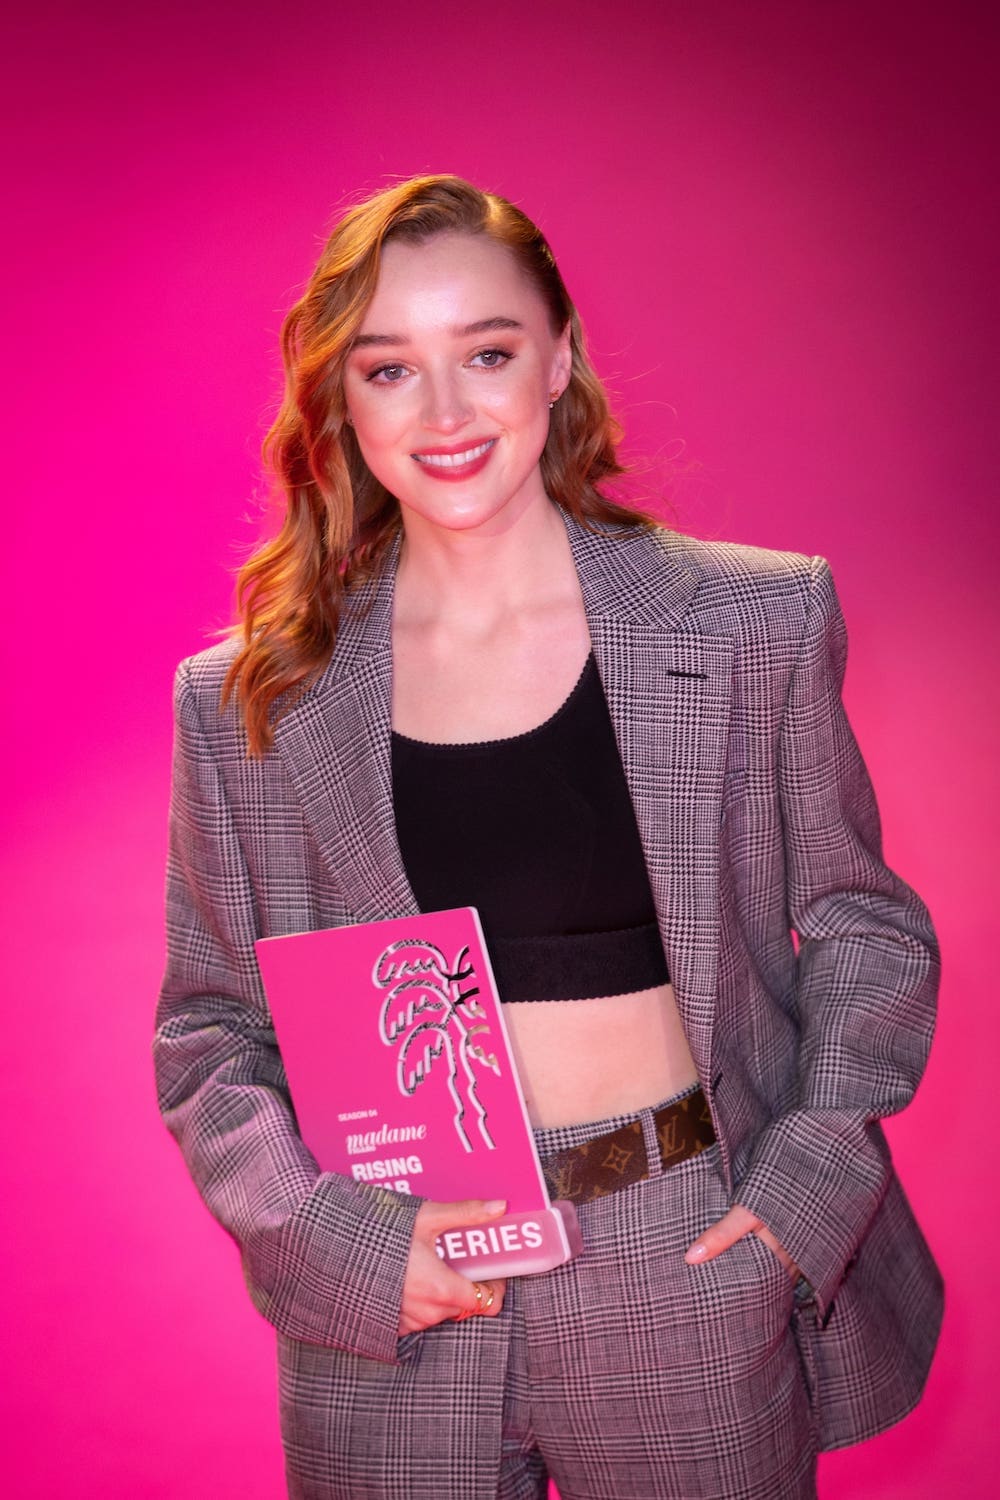 Phoebe Dynevor received an award during the opening ceremony of 4th Cannes International Series Festival (Canneseries) held in Cannes on October 8, 2021.